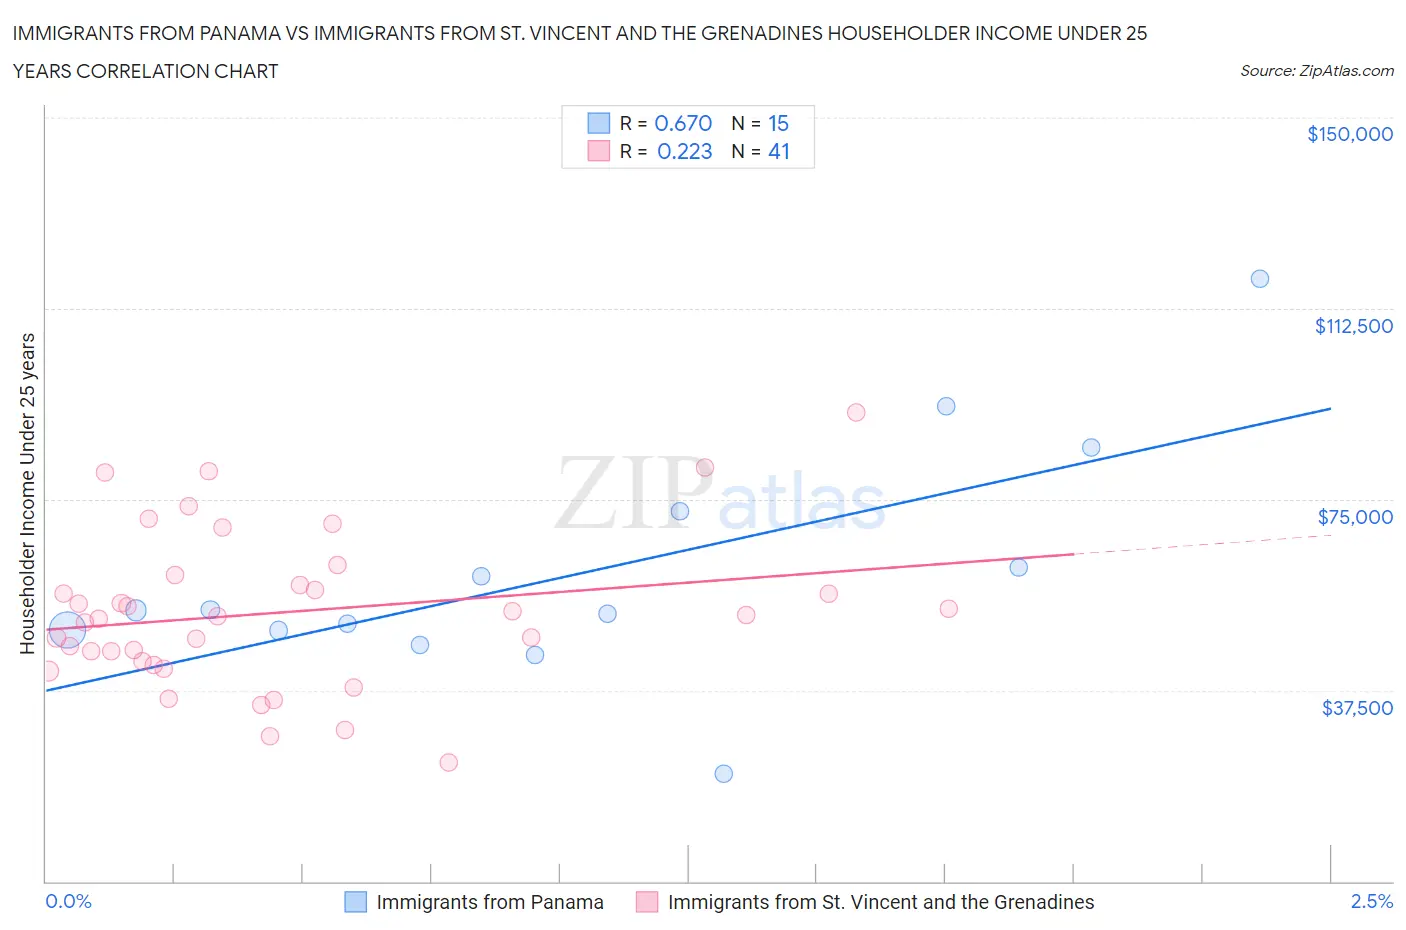 Immigrants from Panama vs Immigrants from St. Vincent and the Grenadines Householder Income Under 25 years